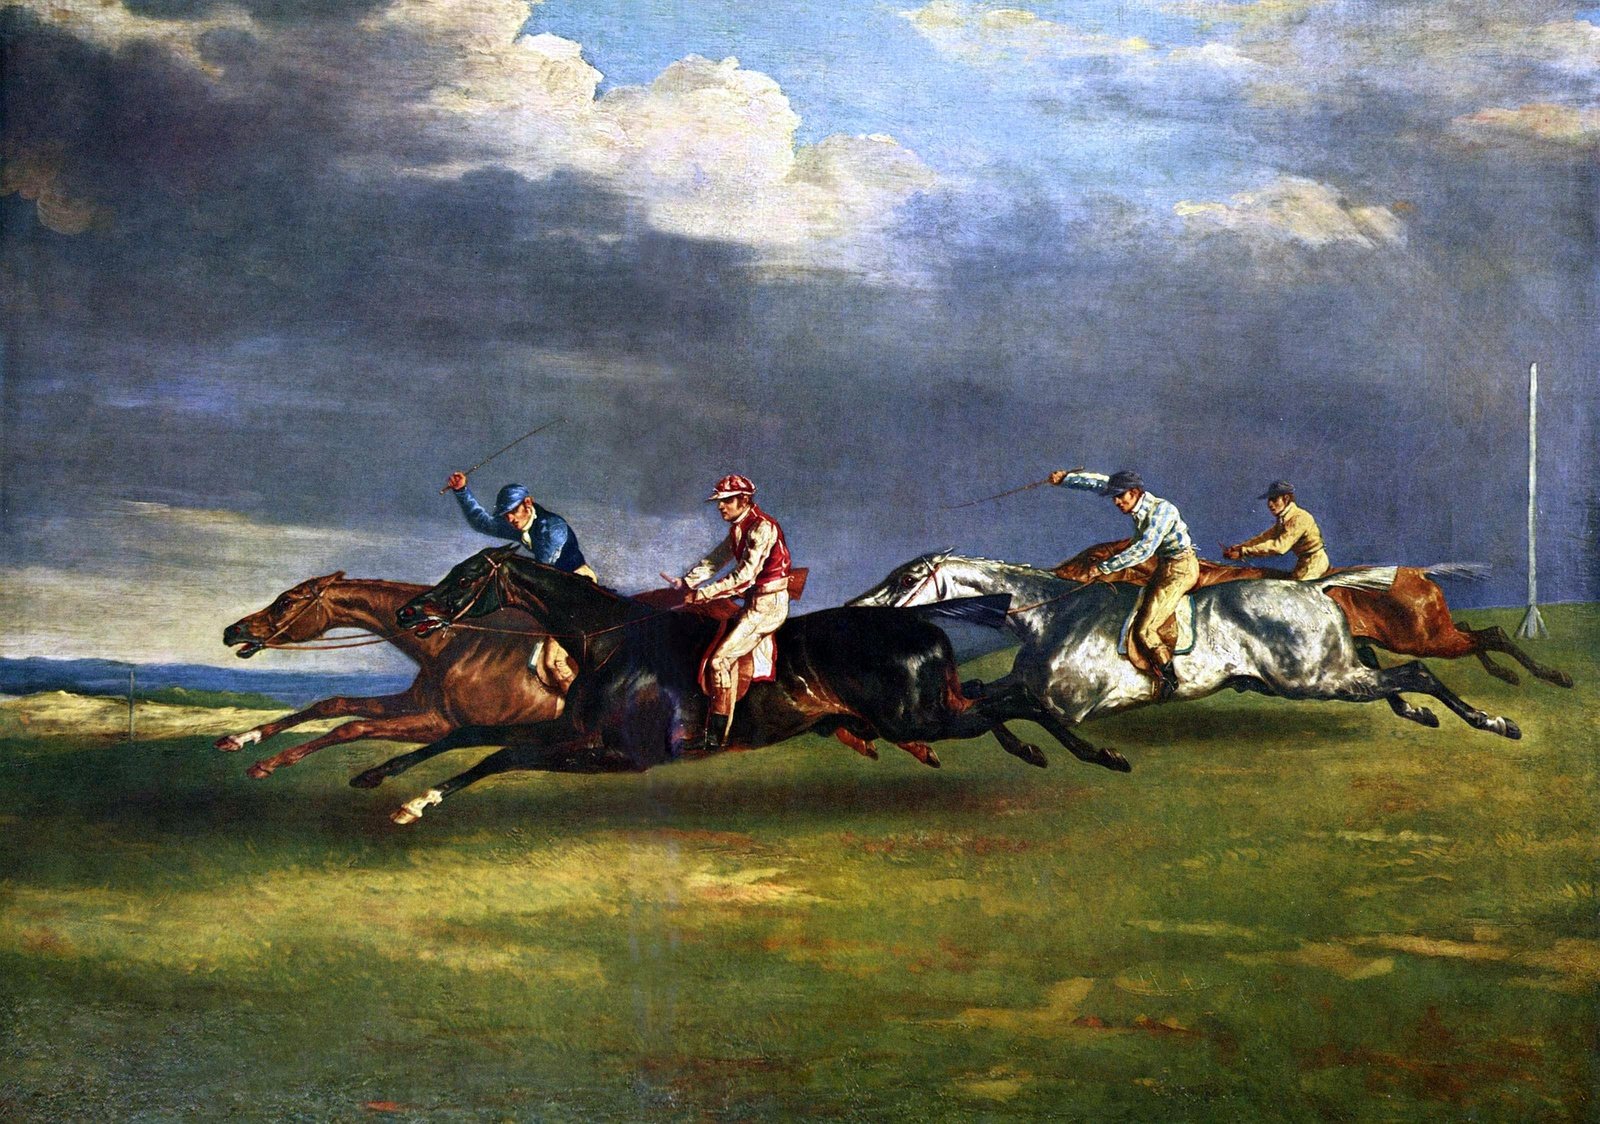 The 1821 Derby at Epsom by Théodore Gericault, source: Wikimedia